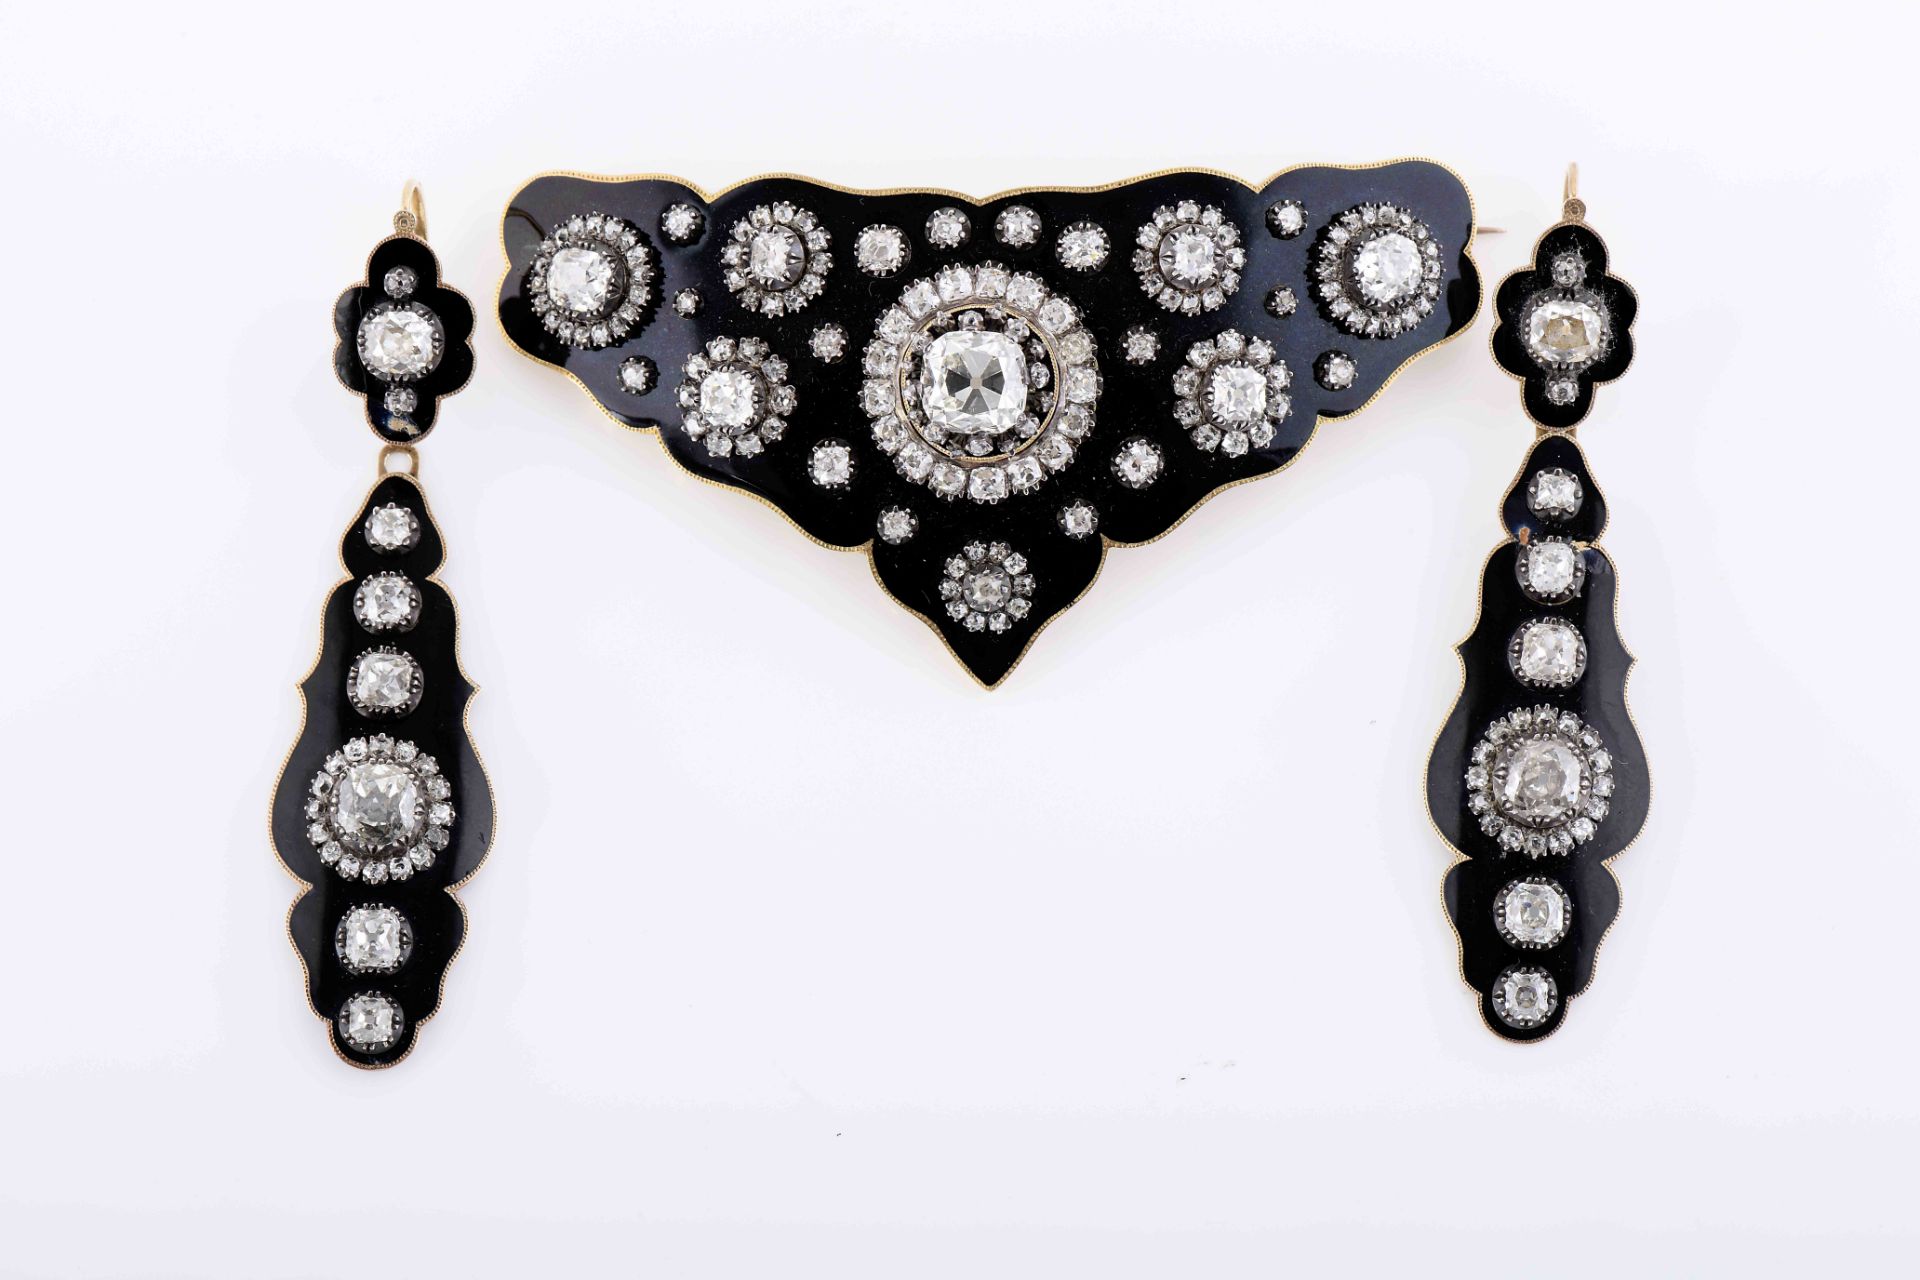 A demi-parure - brooch and pair of earrings